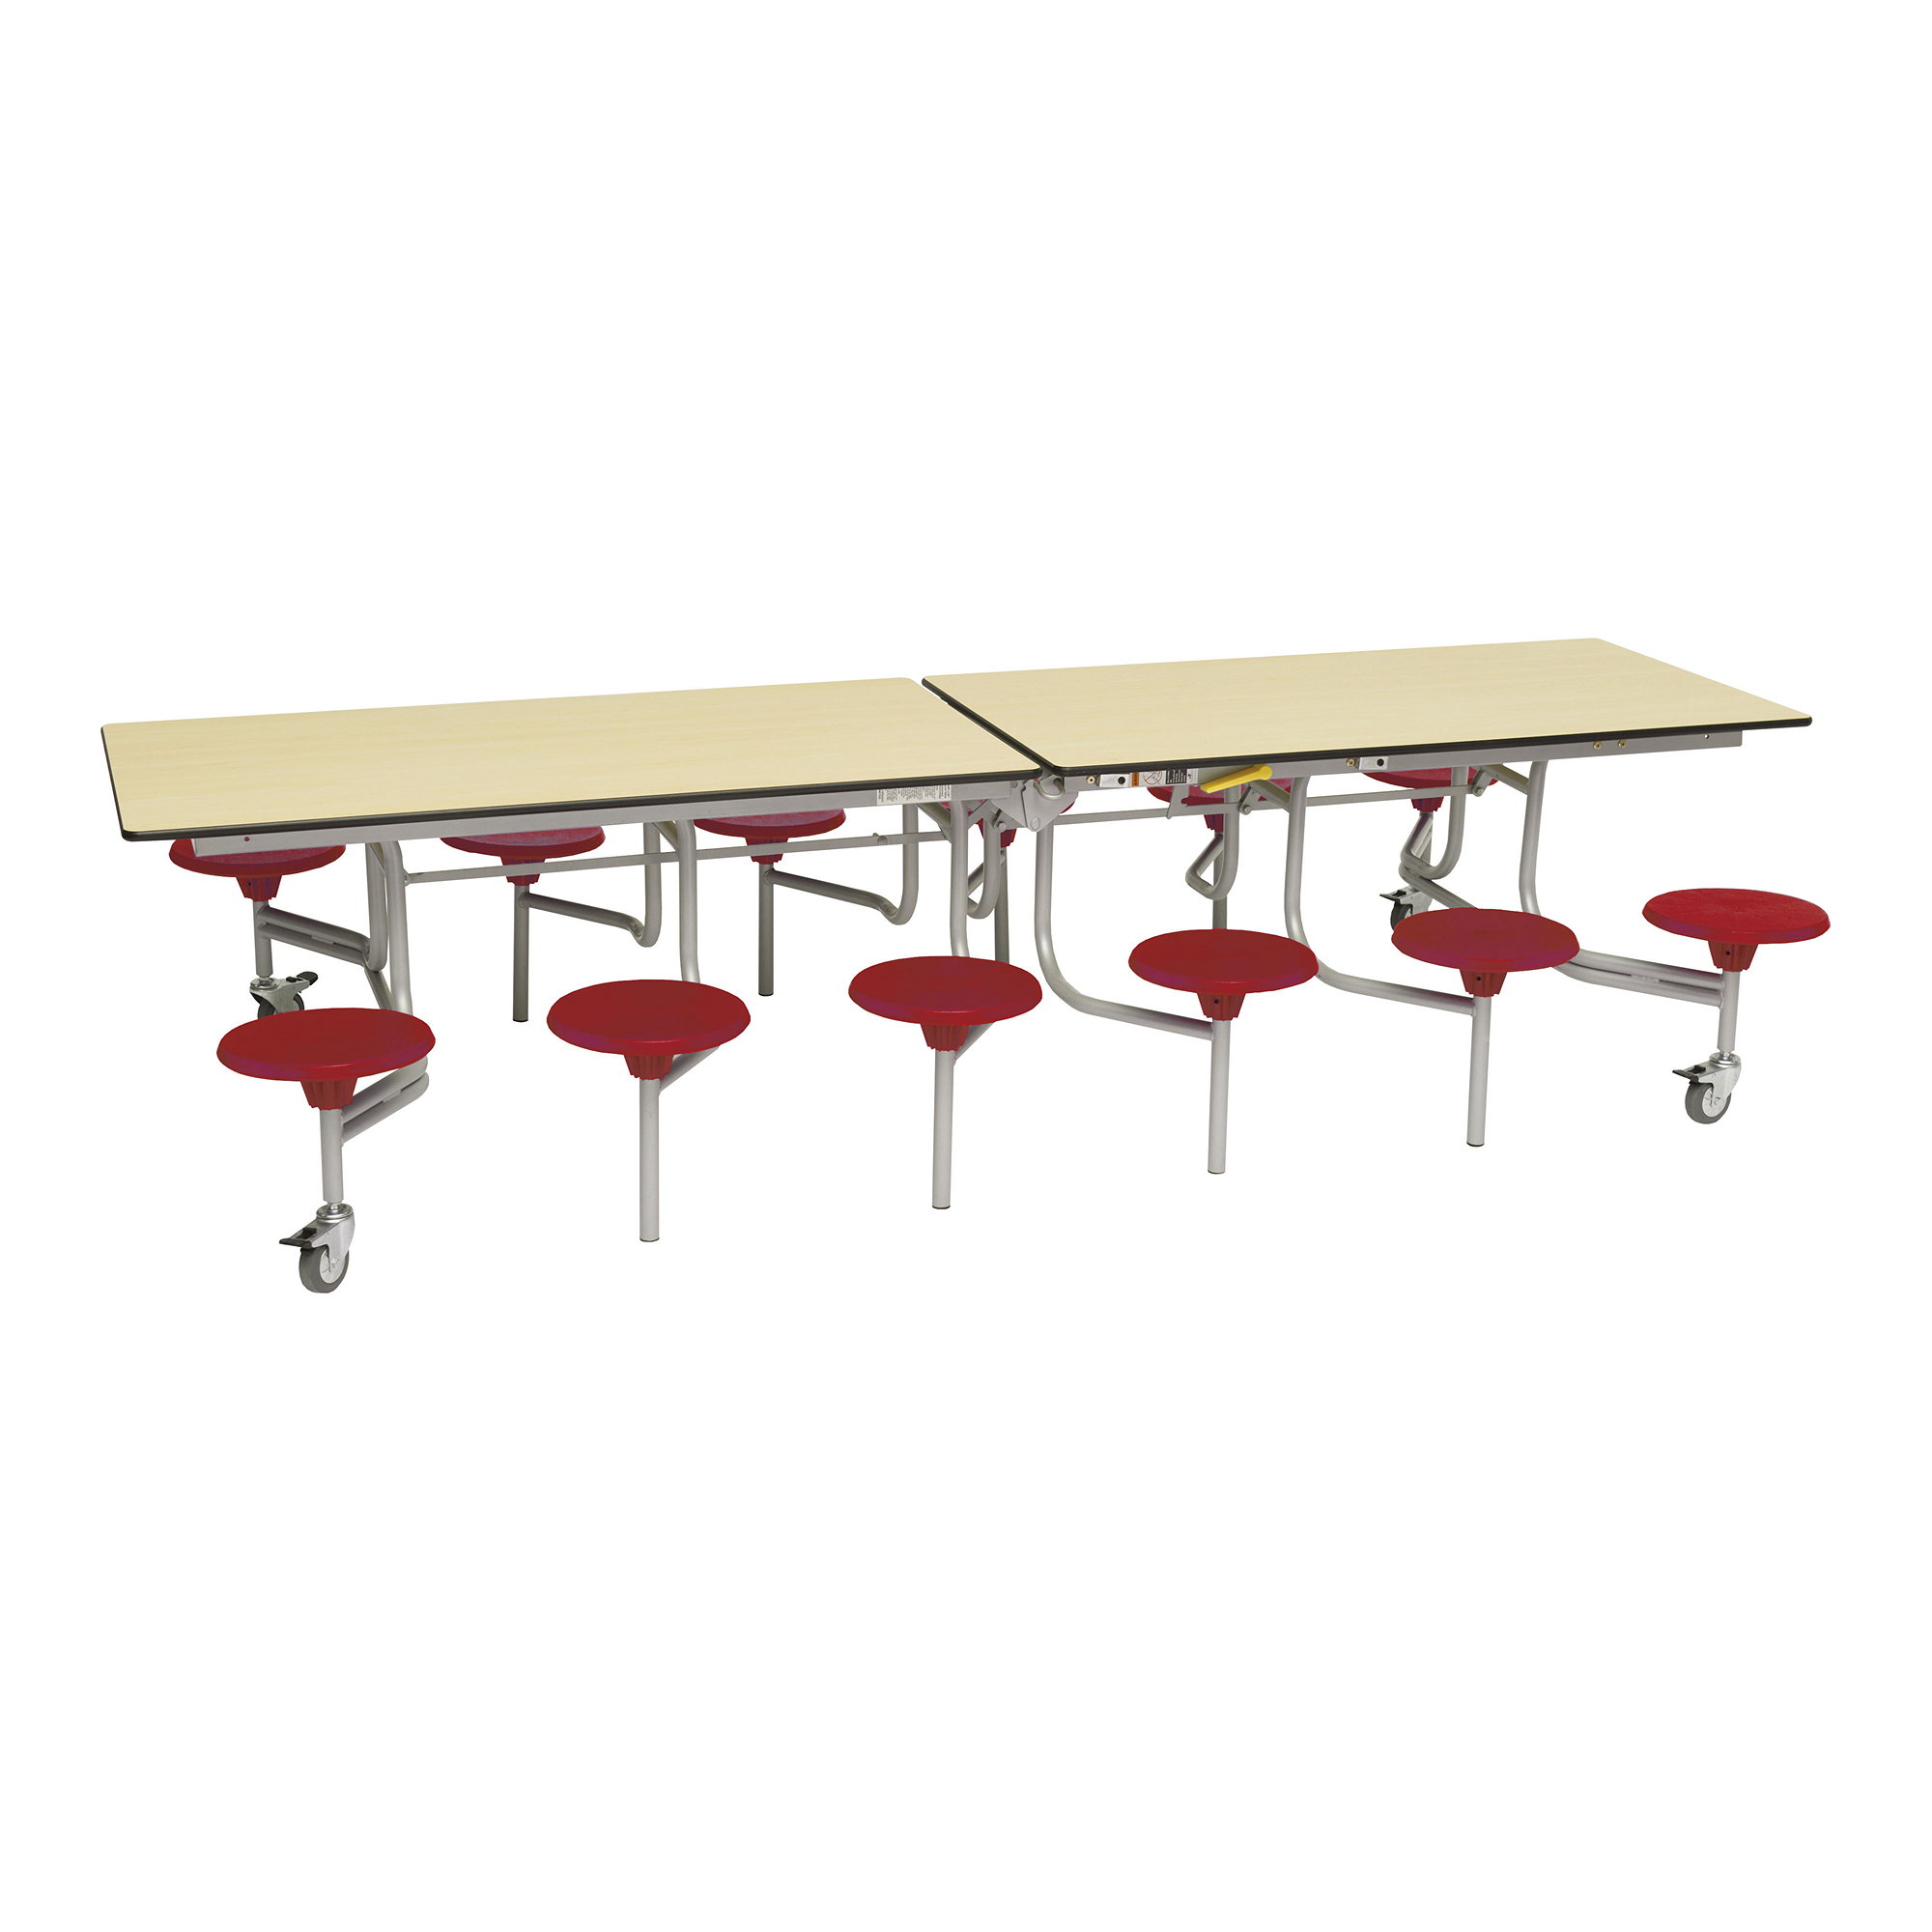 Sec 12 Seat Dining Table WneSeat MpleTop